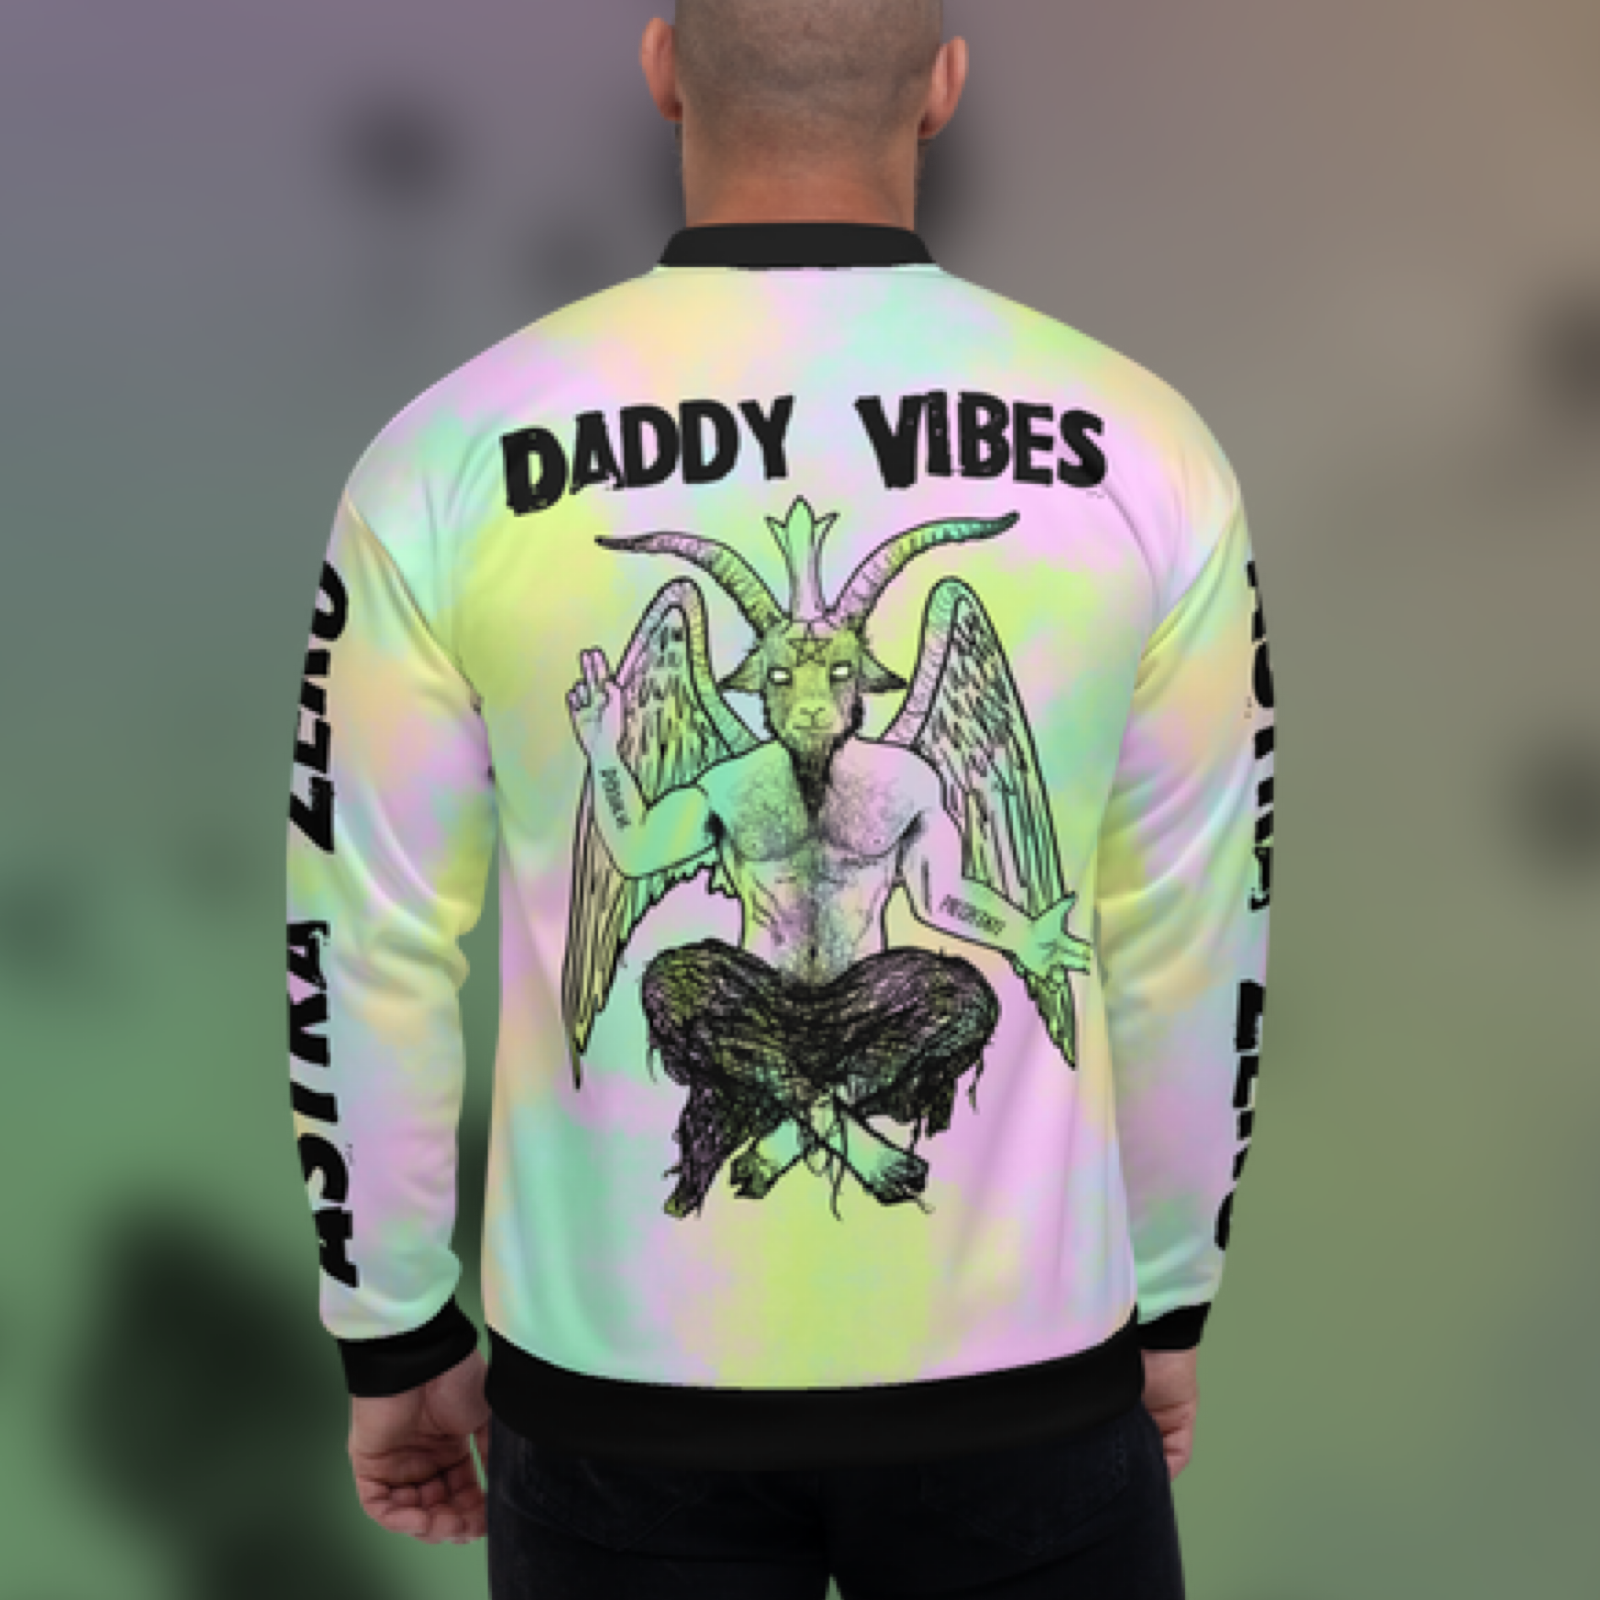 Featured image for “Daddy Vibes Baphomet Pastel - Unisex Bomber Jacket”